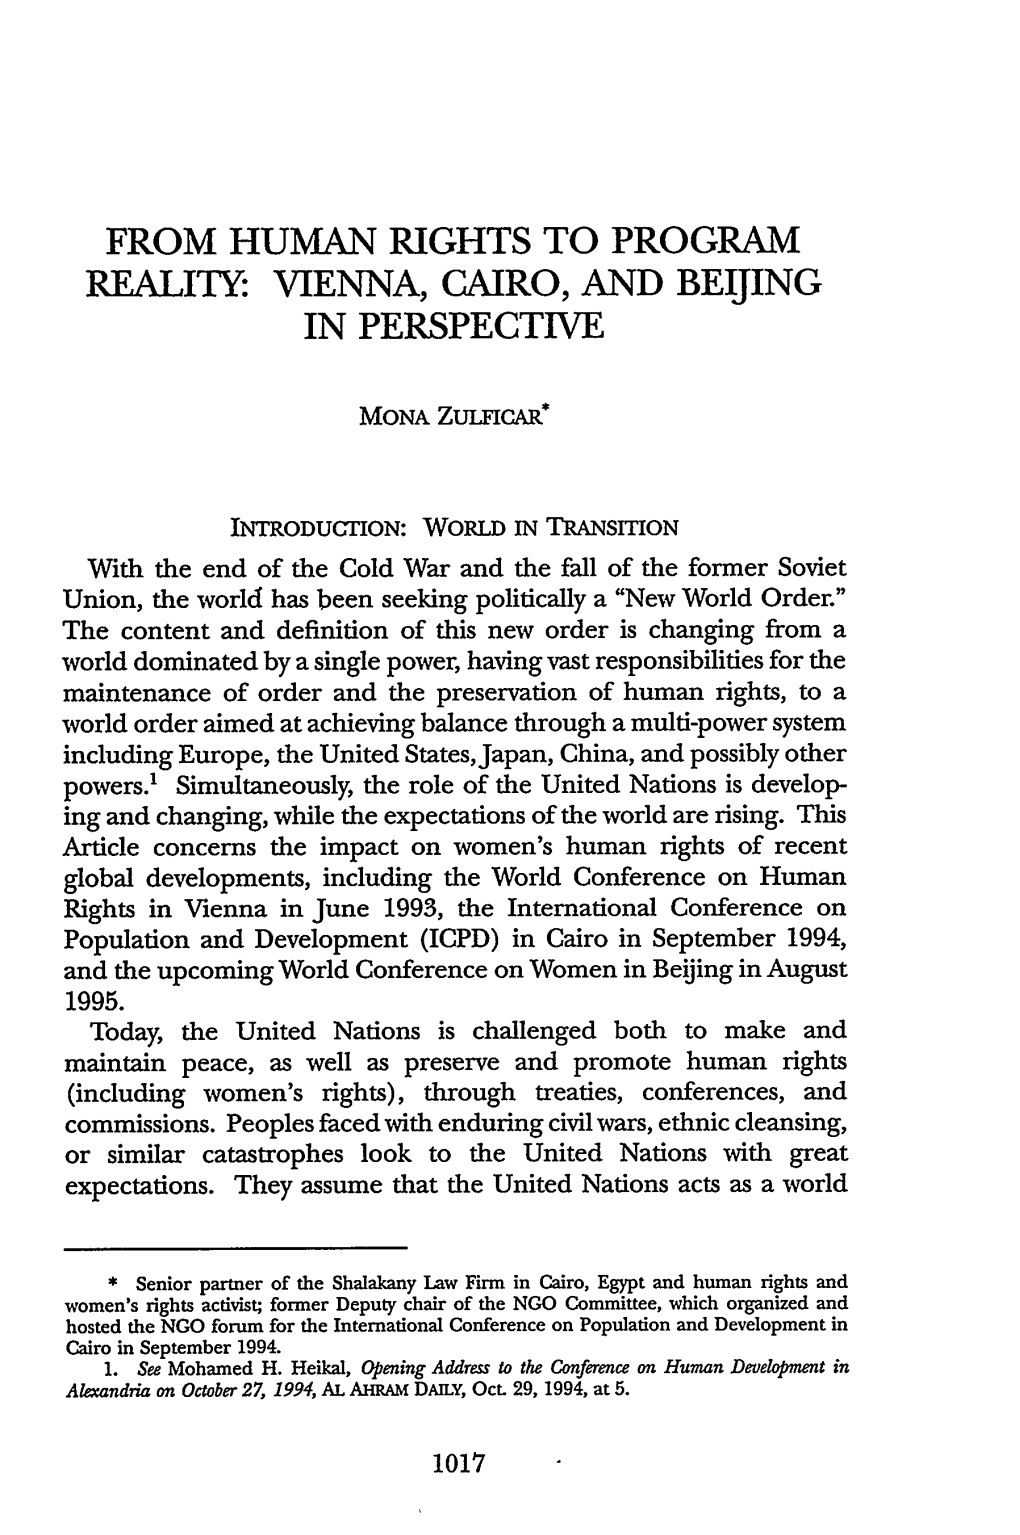 From Human Rights to Program Reality: Vienna, Cairo, and Beijing in Perspective